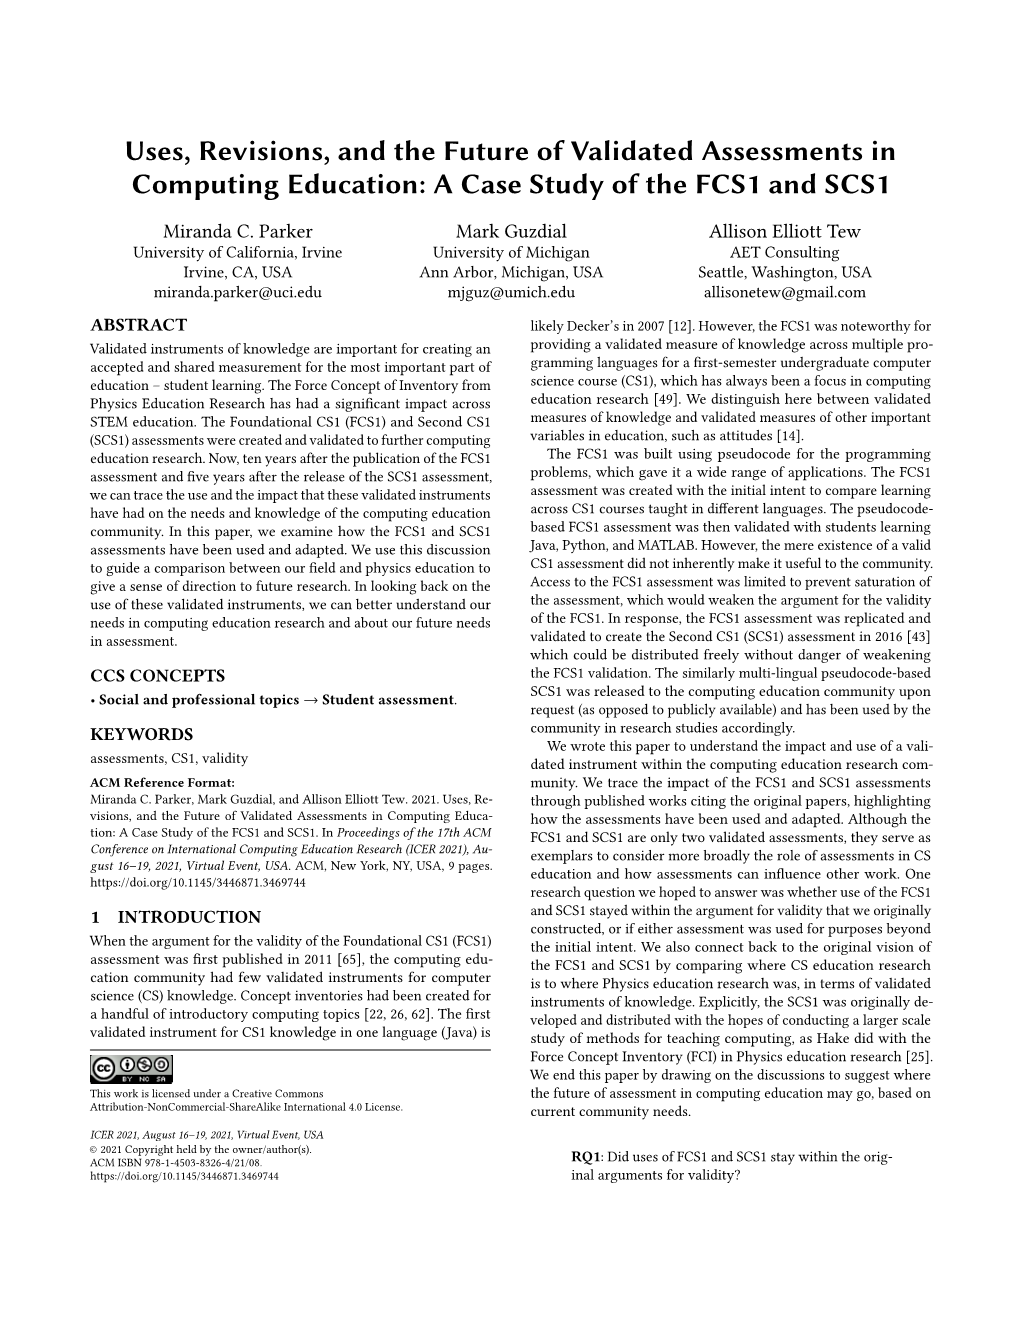 A Case Study of the FCS1 and SCS1